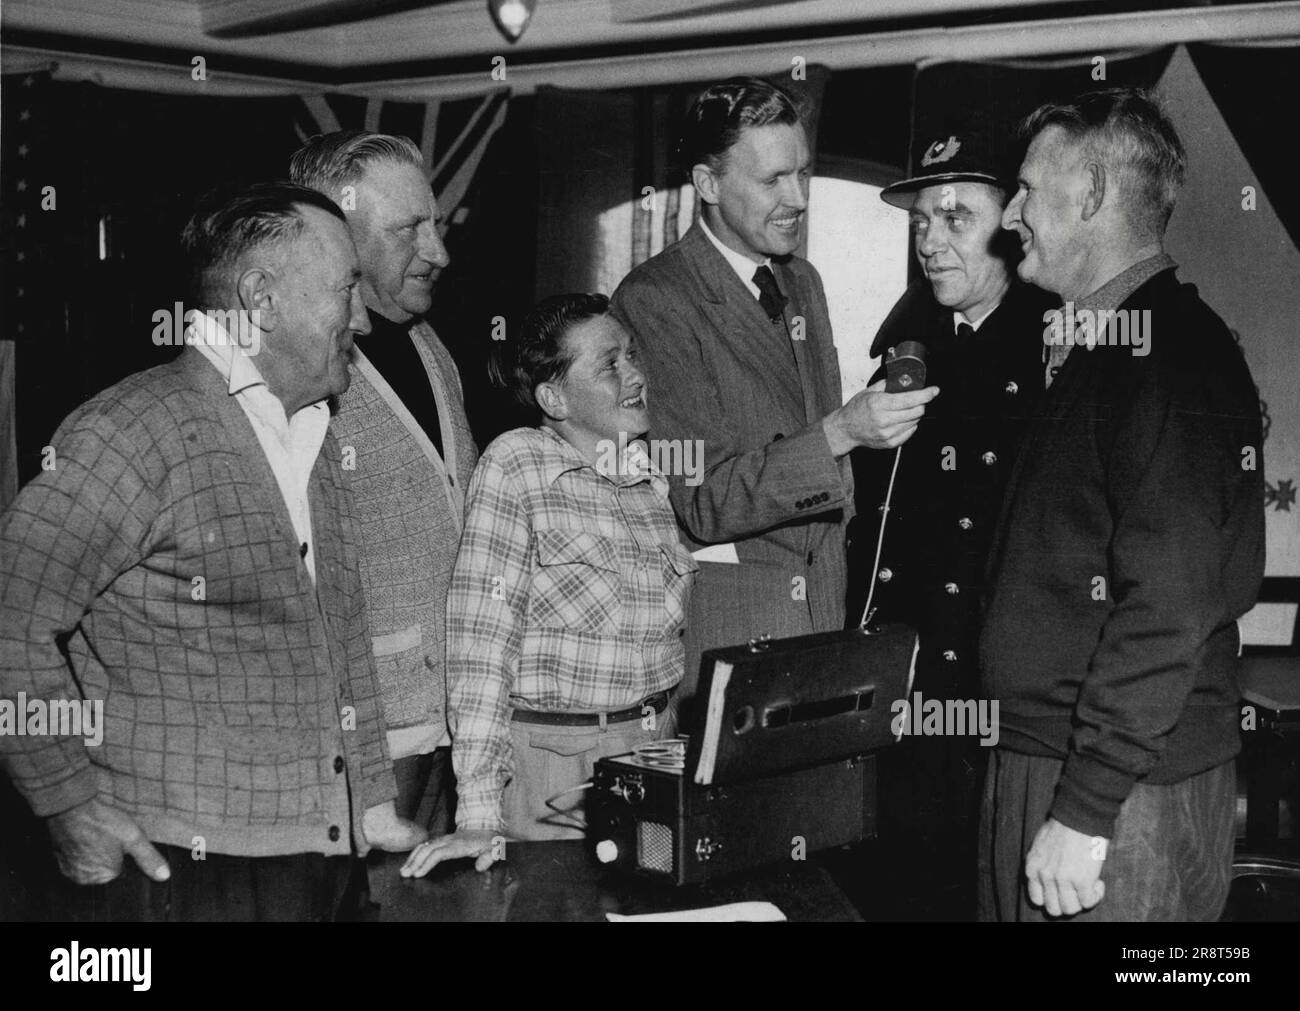 Fisherman who drifted out to sea from Botany Bay on Wednesday morning were rescued by the Dutch shop Tjibadak. Here they are being interviewed by 5DN/radio announcer Ken Chinner. Left to right - George Smith, Ernest Foster, Ray Hartley, Ken Chinner (announcer), Captain C. de Wolff, captain of the ship which rescued the men, and Frank Munsie. September 17, 1953. Stock Photo